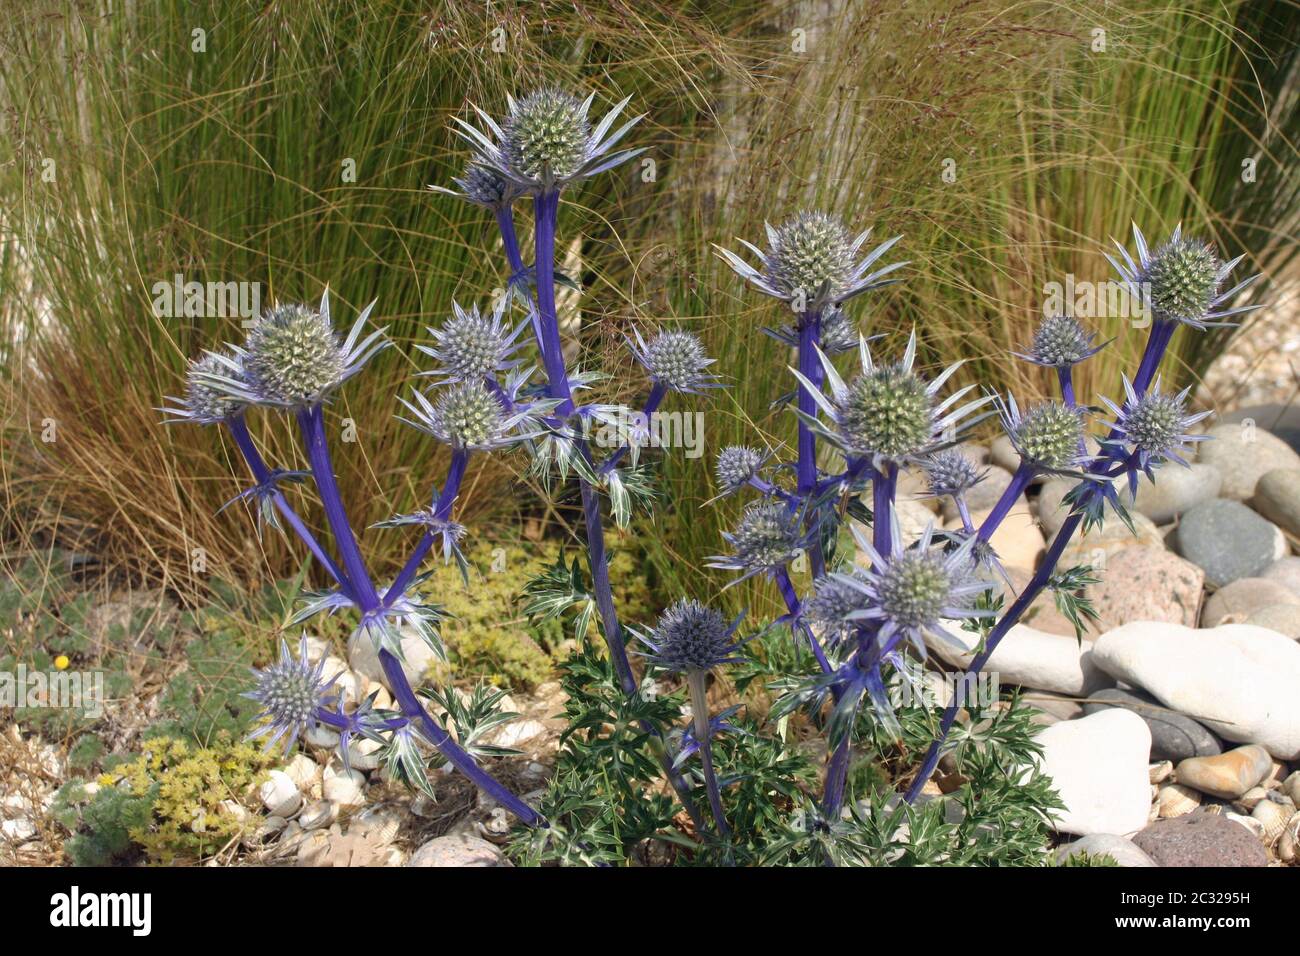 Ornamental sea holly (Eryngium) flowers growing in a flower bed by the beach. Background of grasses, gravel and large pebbles. Stock Photo